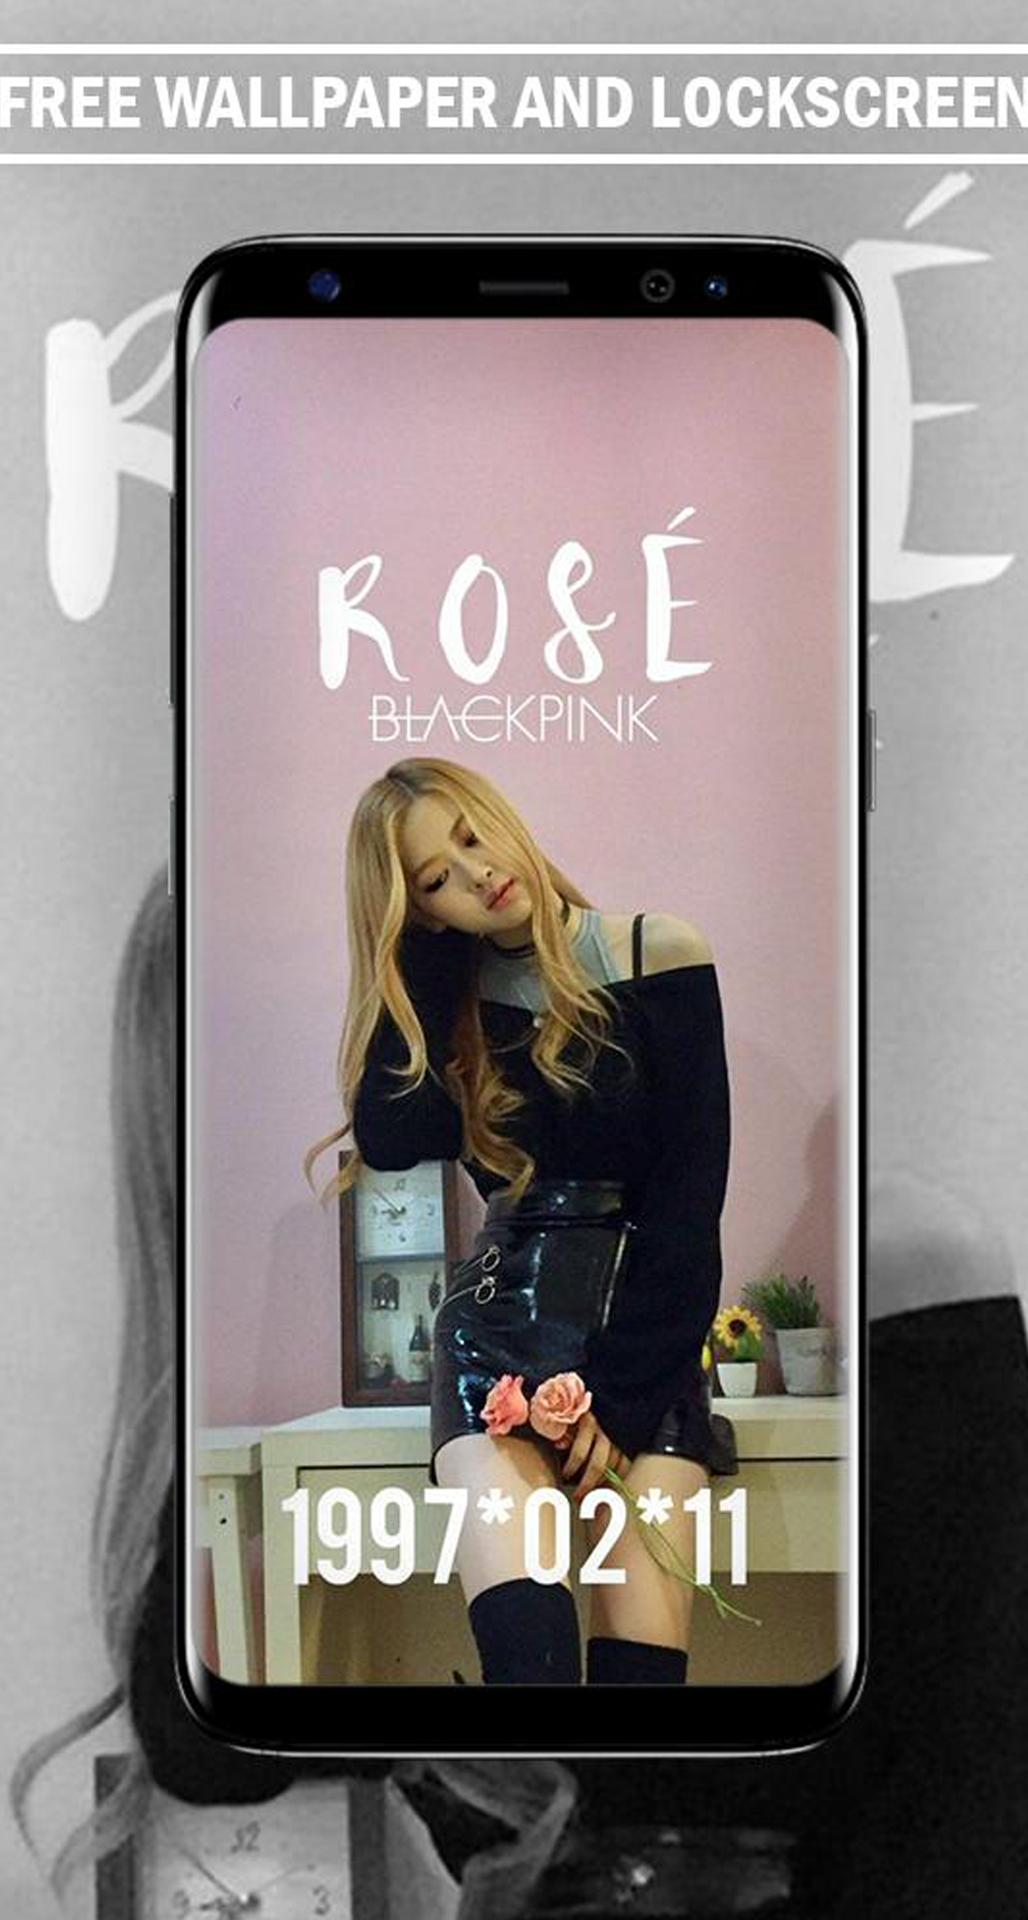  BlackPink  Wallpaper  HD  2021  for Android APK  Download